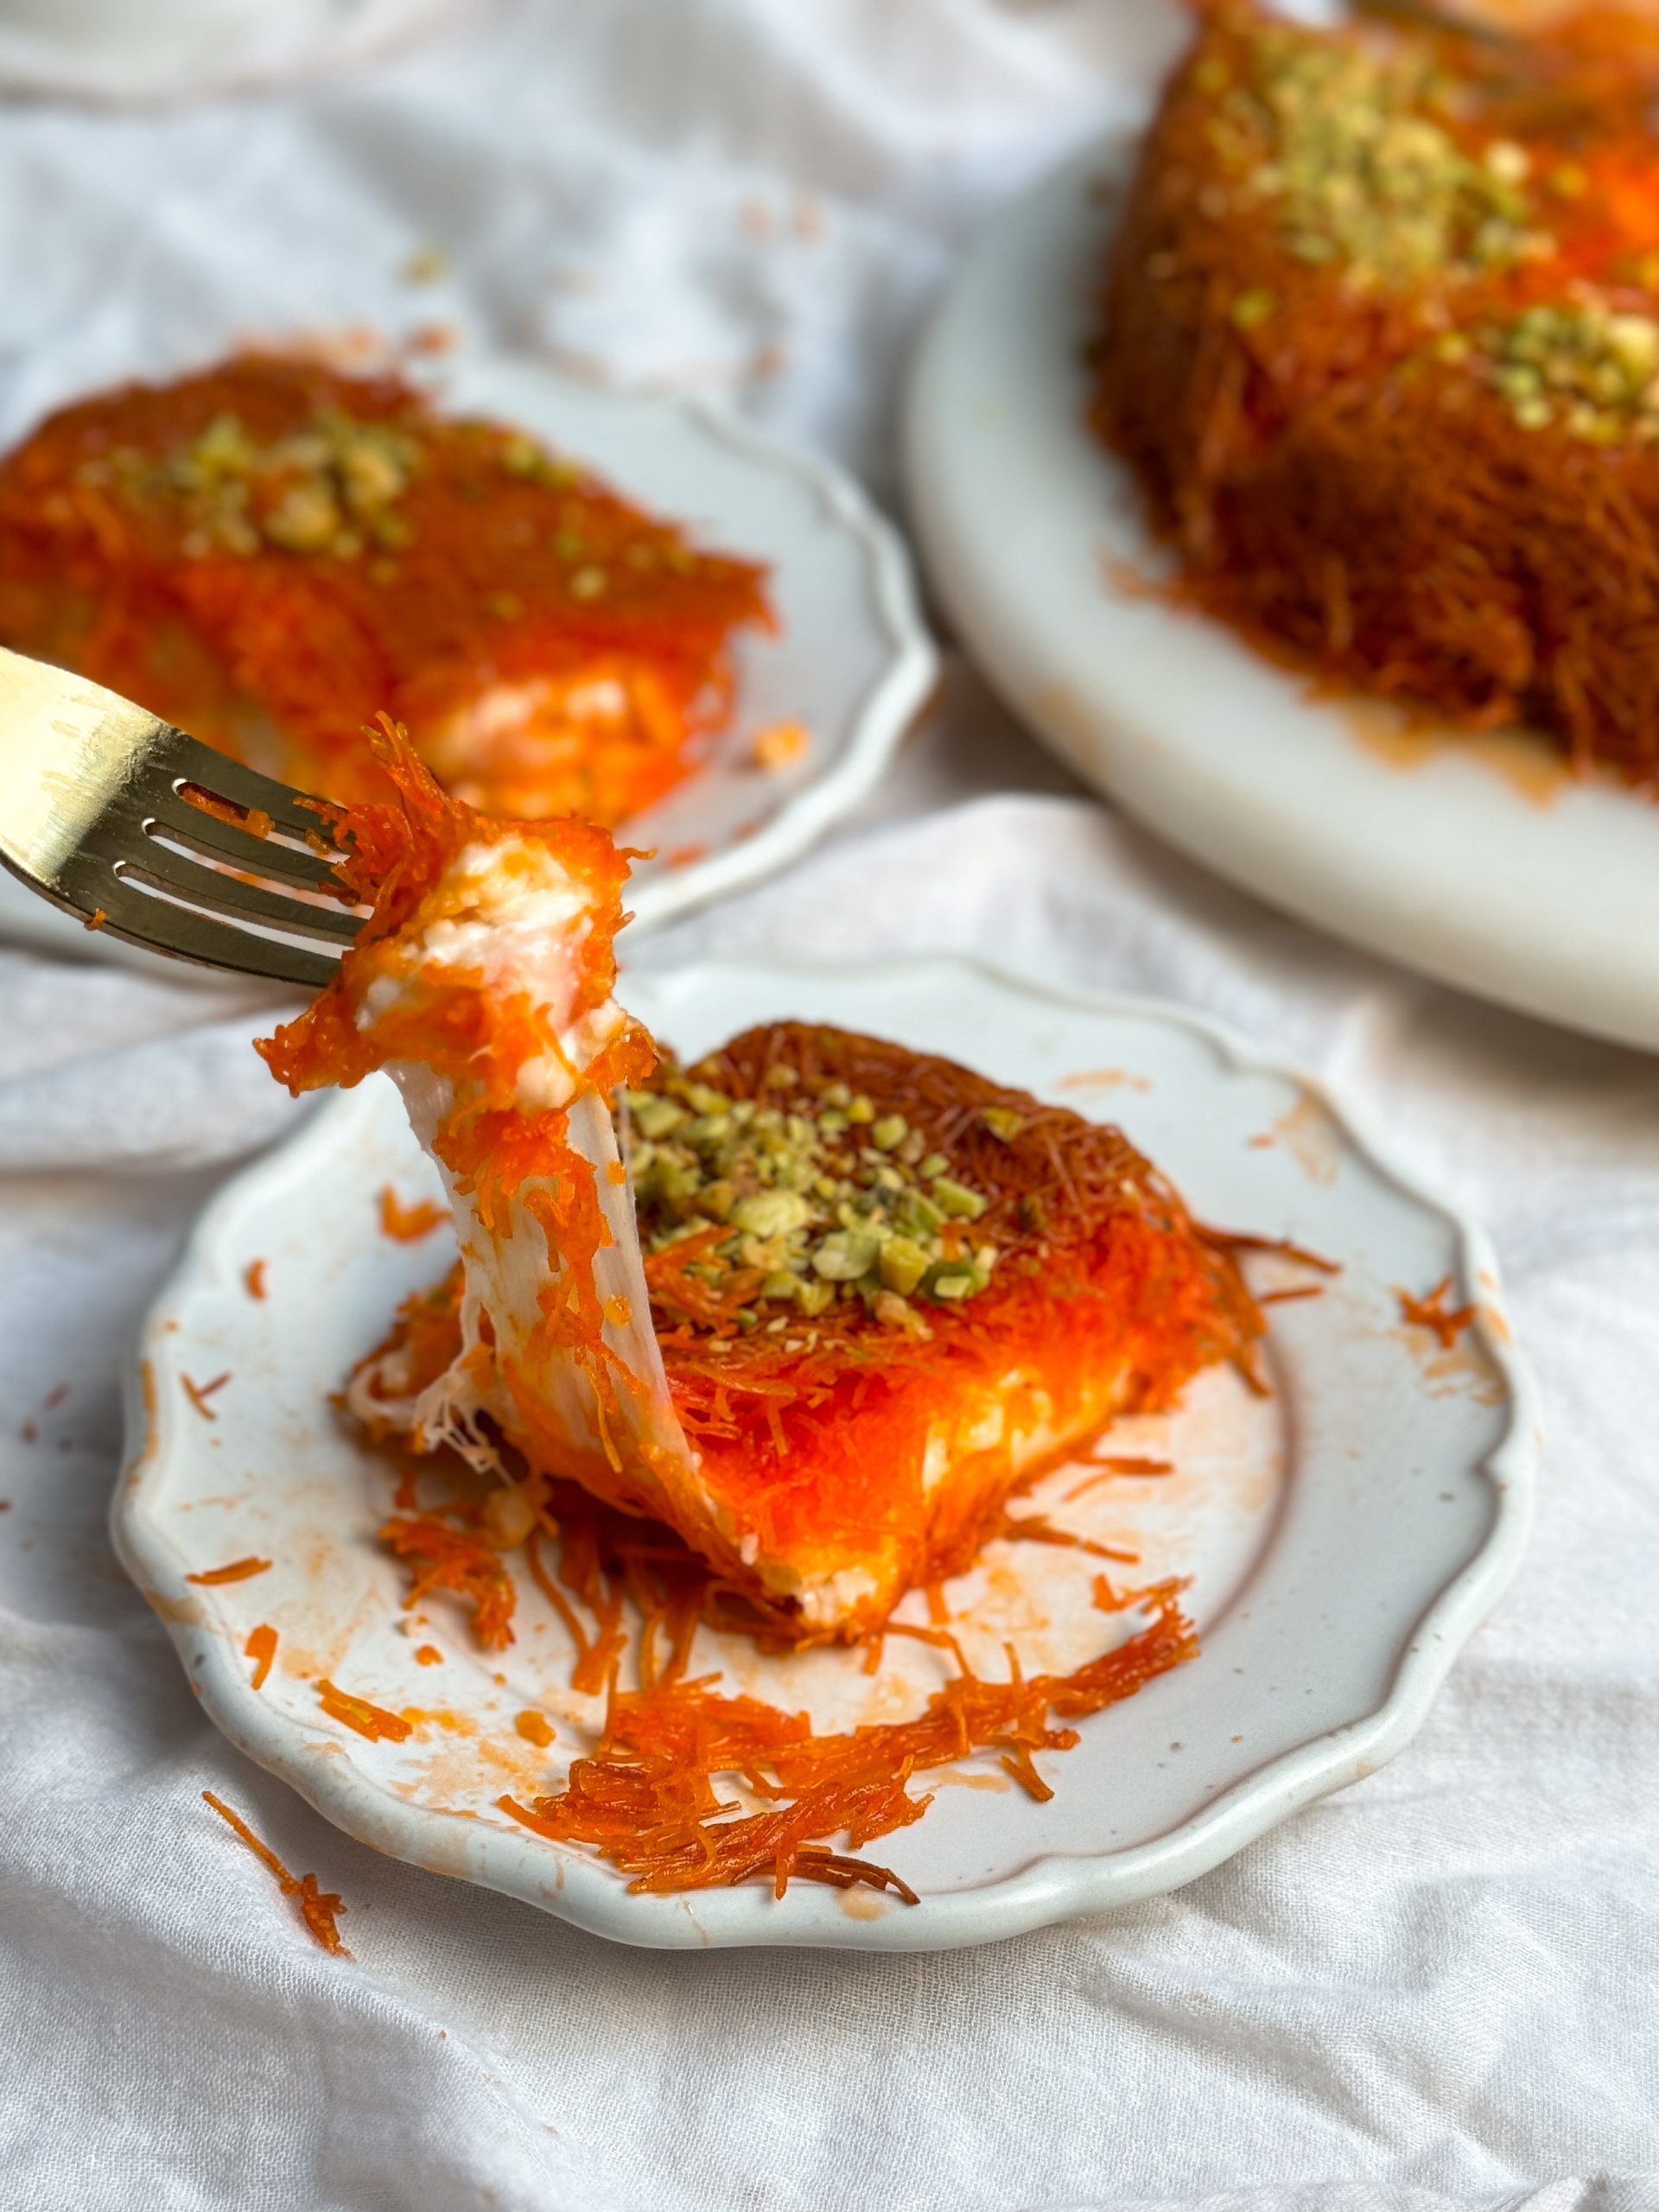 slice of knafeh with crispy pastry and melted cheese inside on a small plate, another plate in the background. fork is pulling out a bite with a string of cheese (cheese pull)